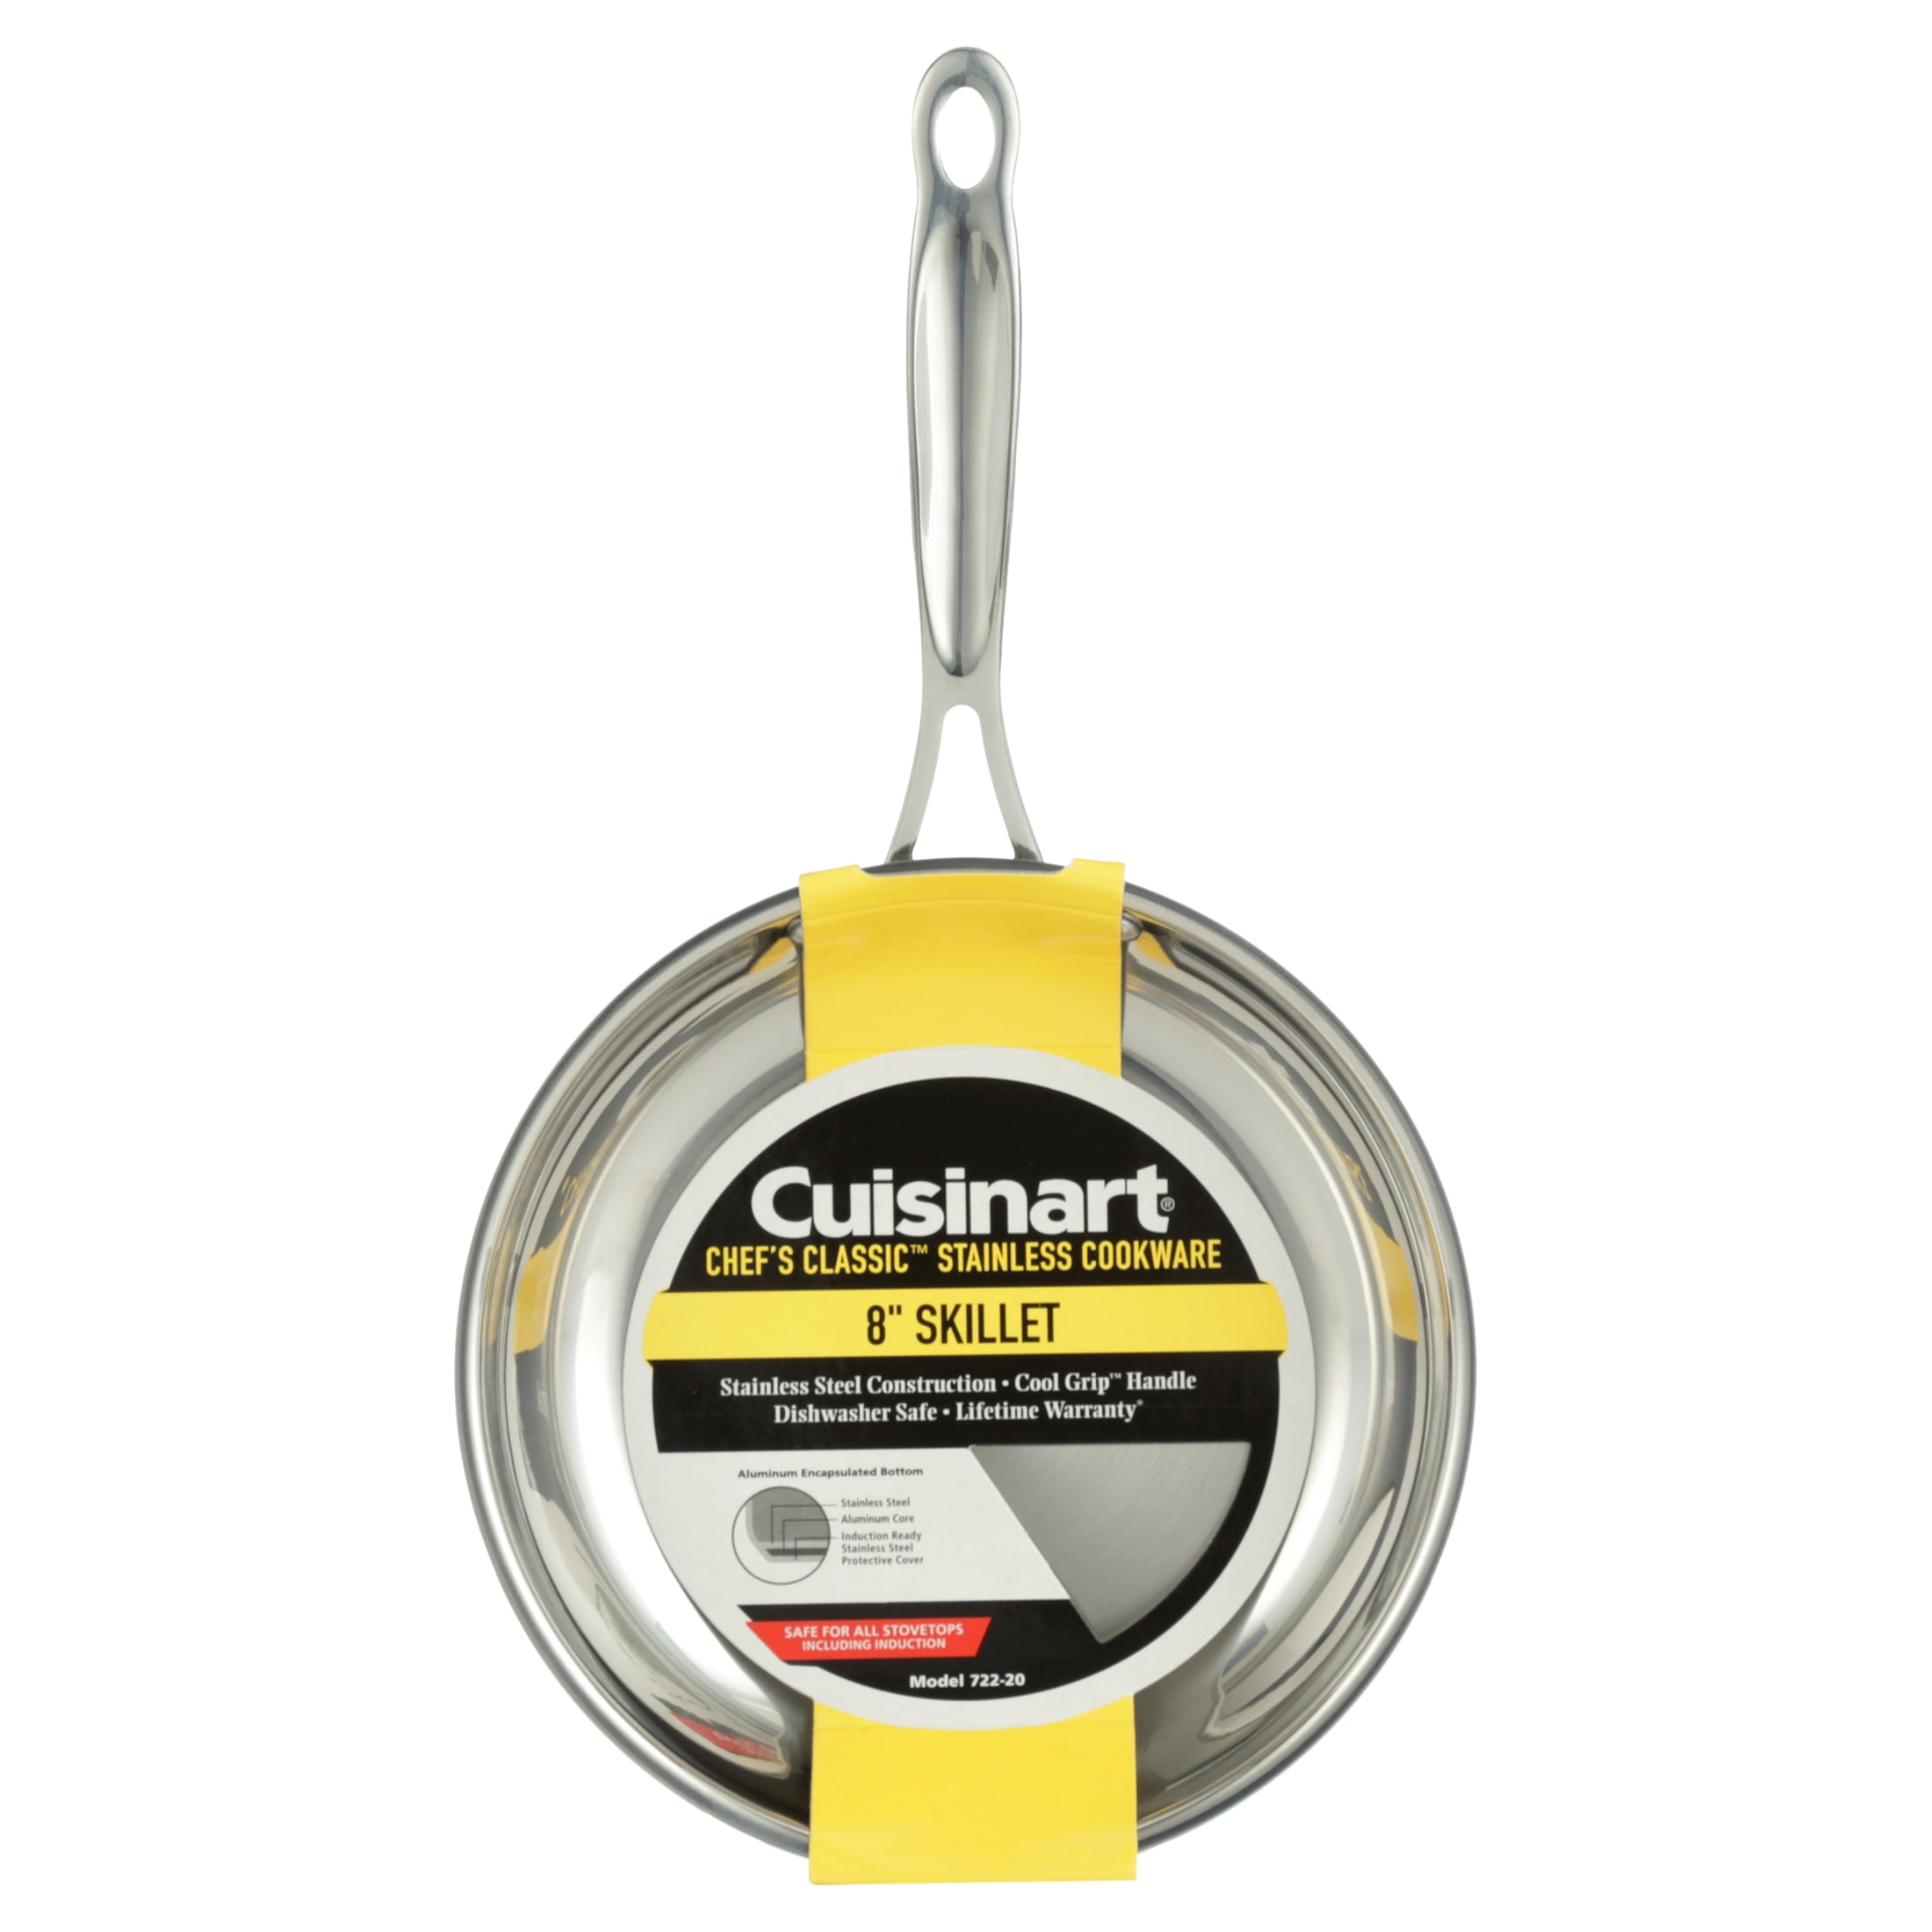 Cuisinart Chef's Classic Stainless Steel Skillet, Black